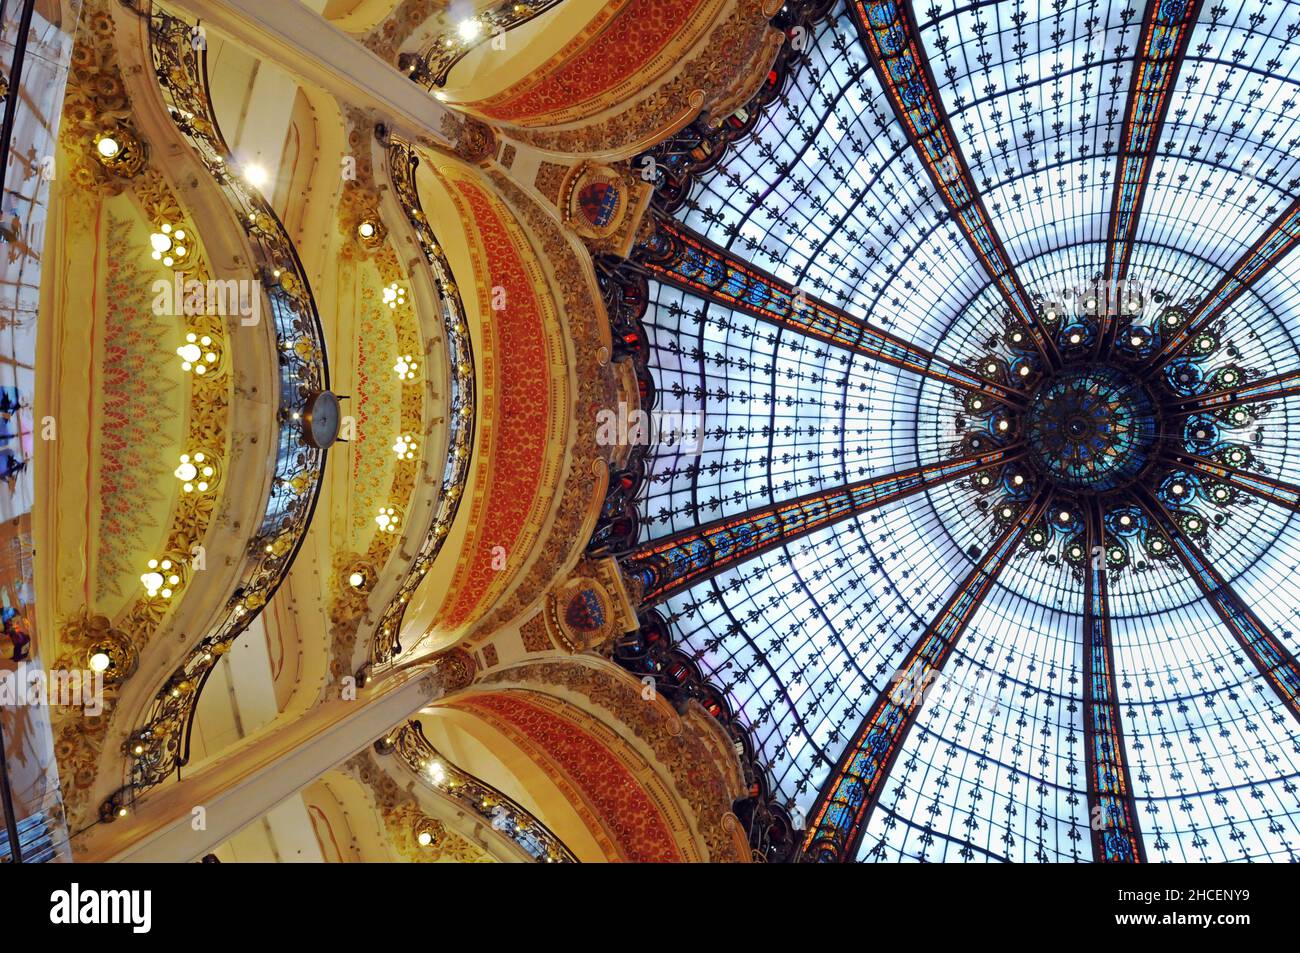 The art nouveau-style stained glass dome in the flagship Galeries Lafayette department store in Paris was constructed in 1912. Stock Photo